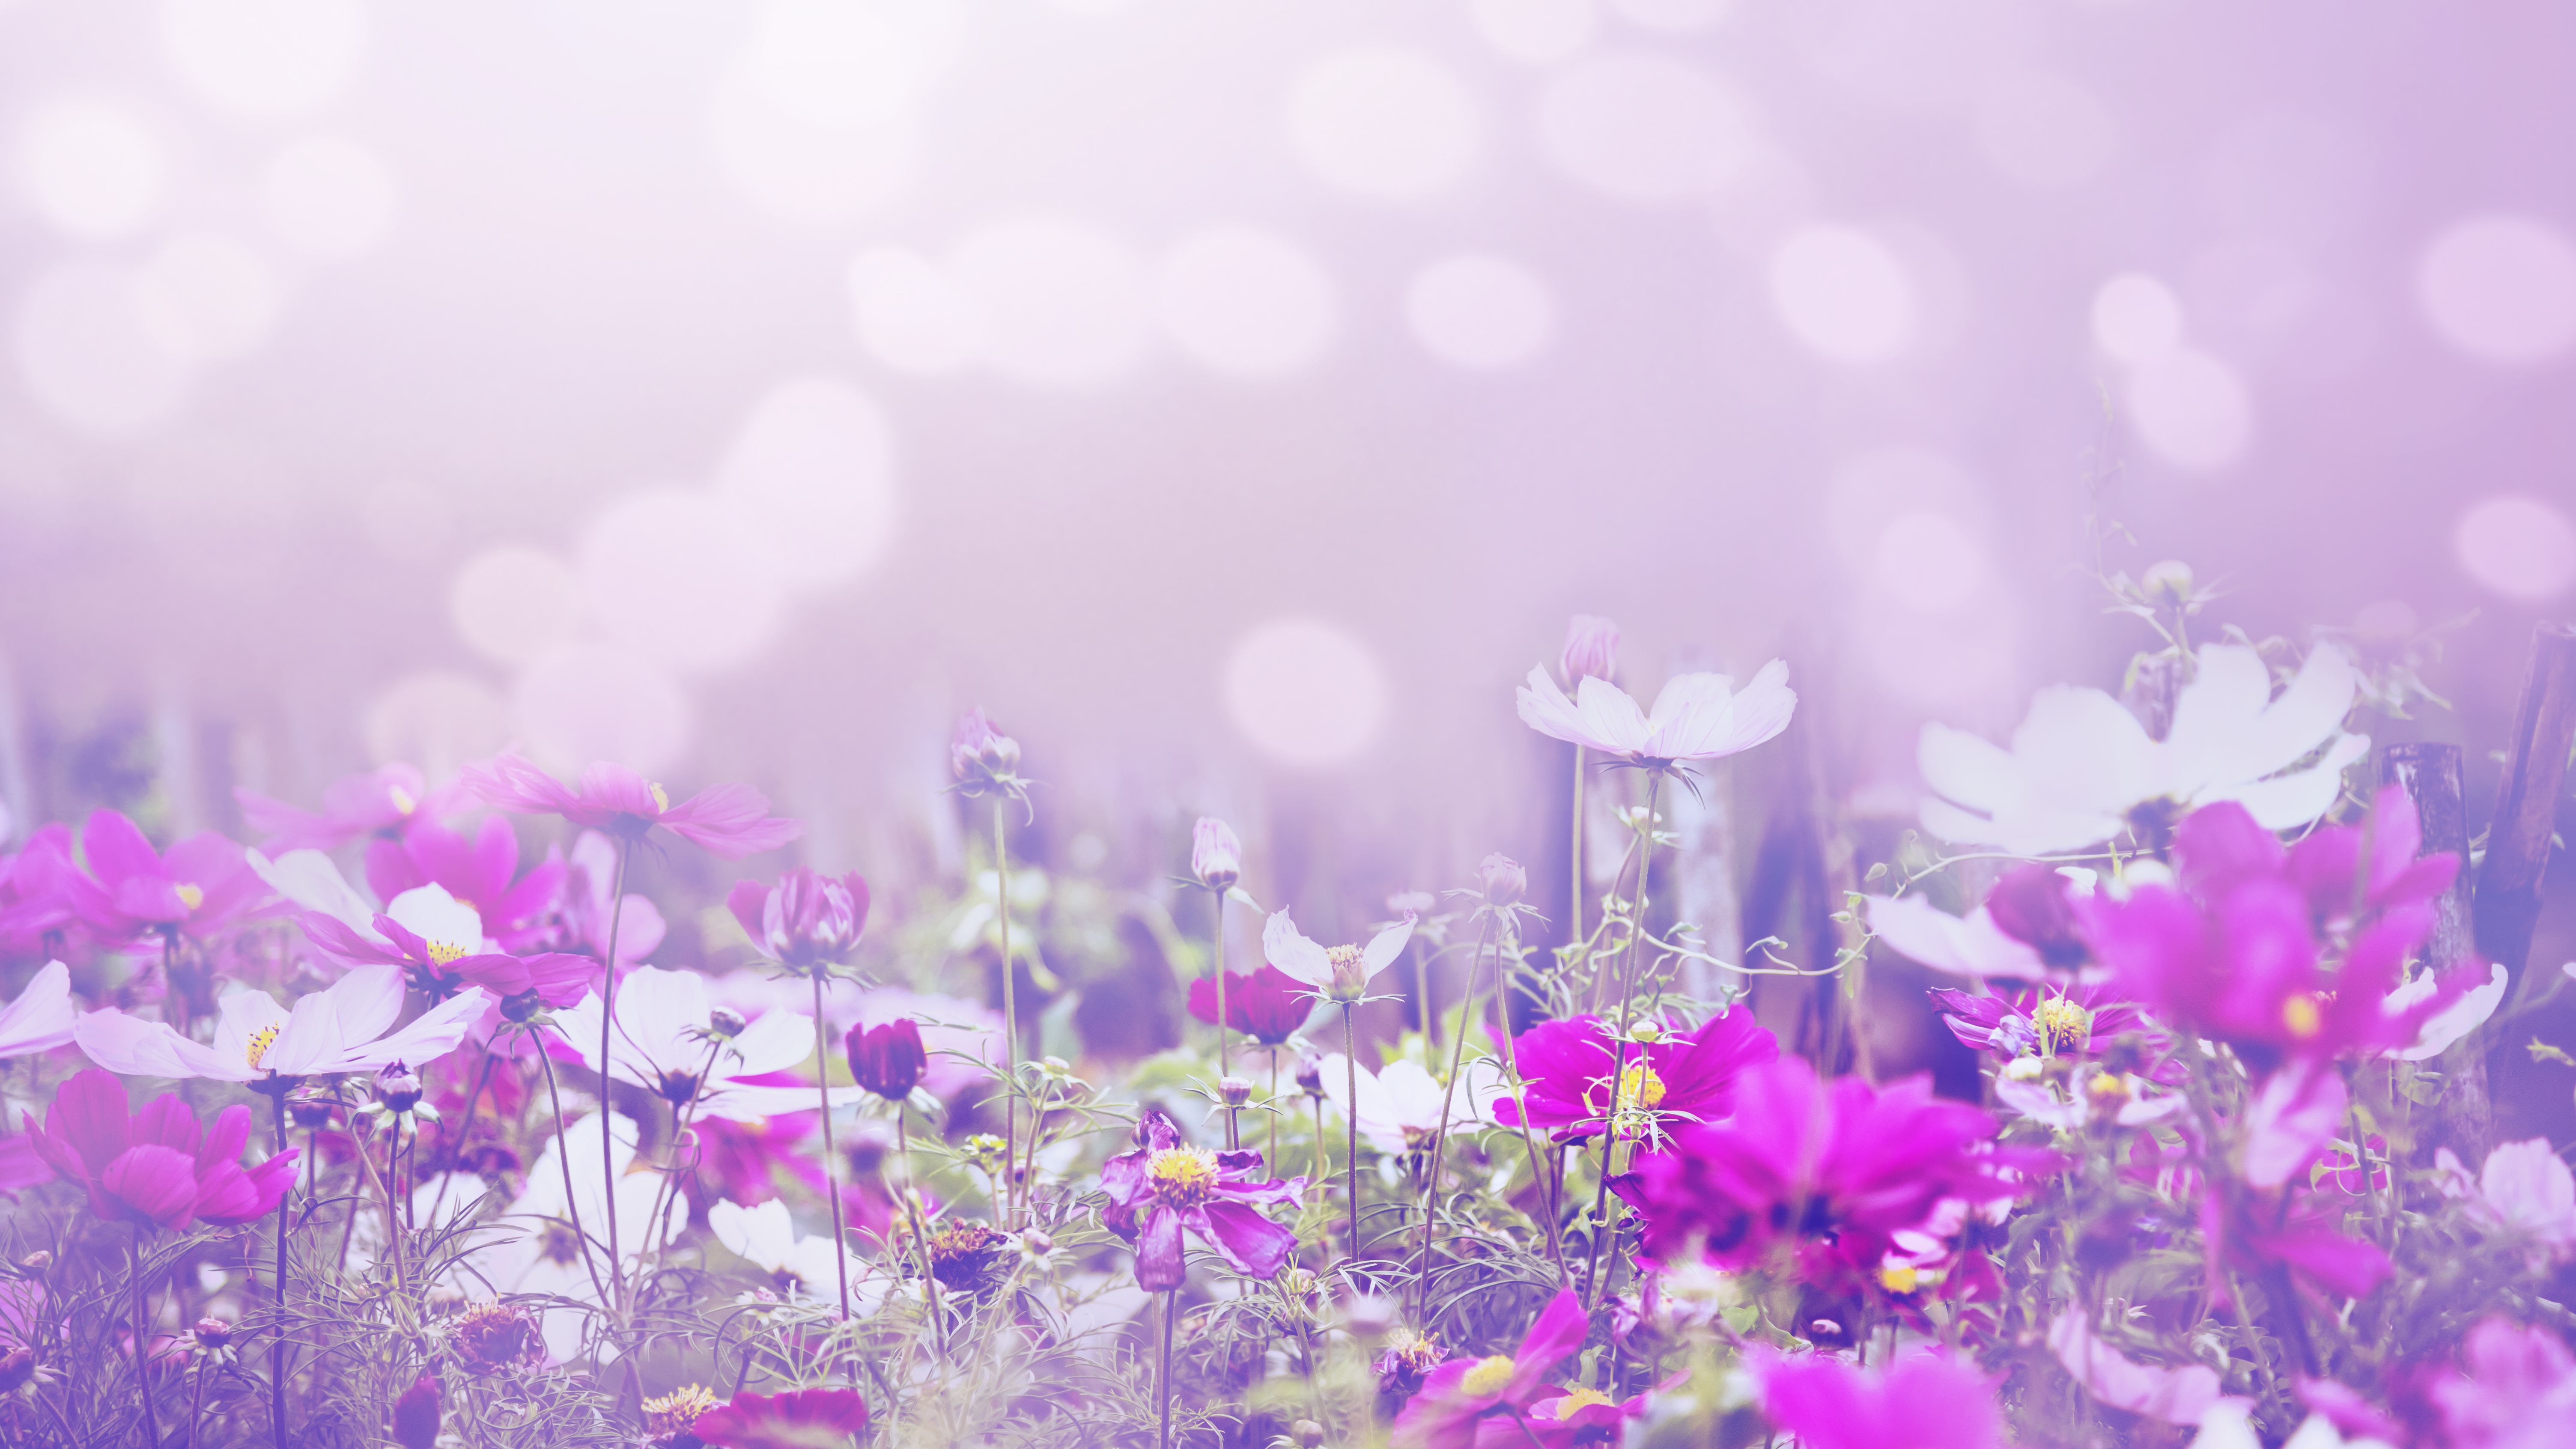 Flower Wallpaper , Image and Background for Free Download